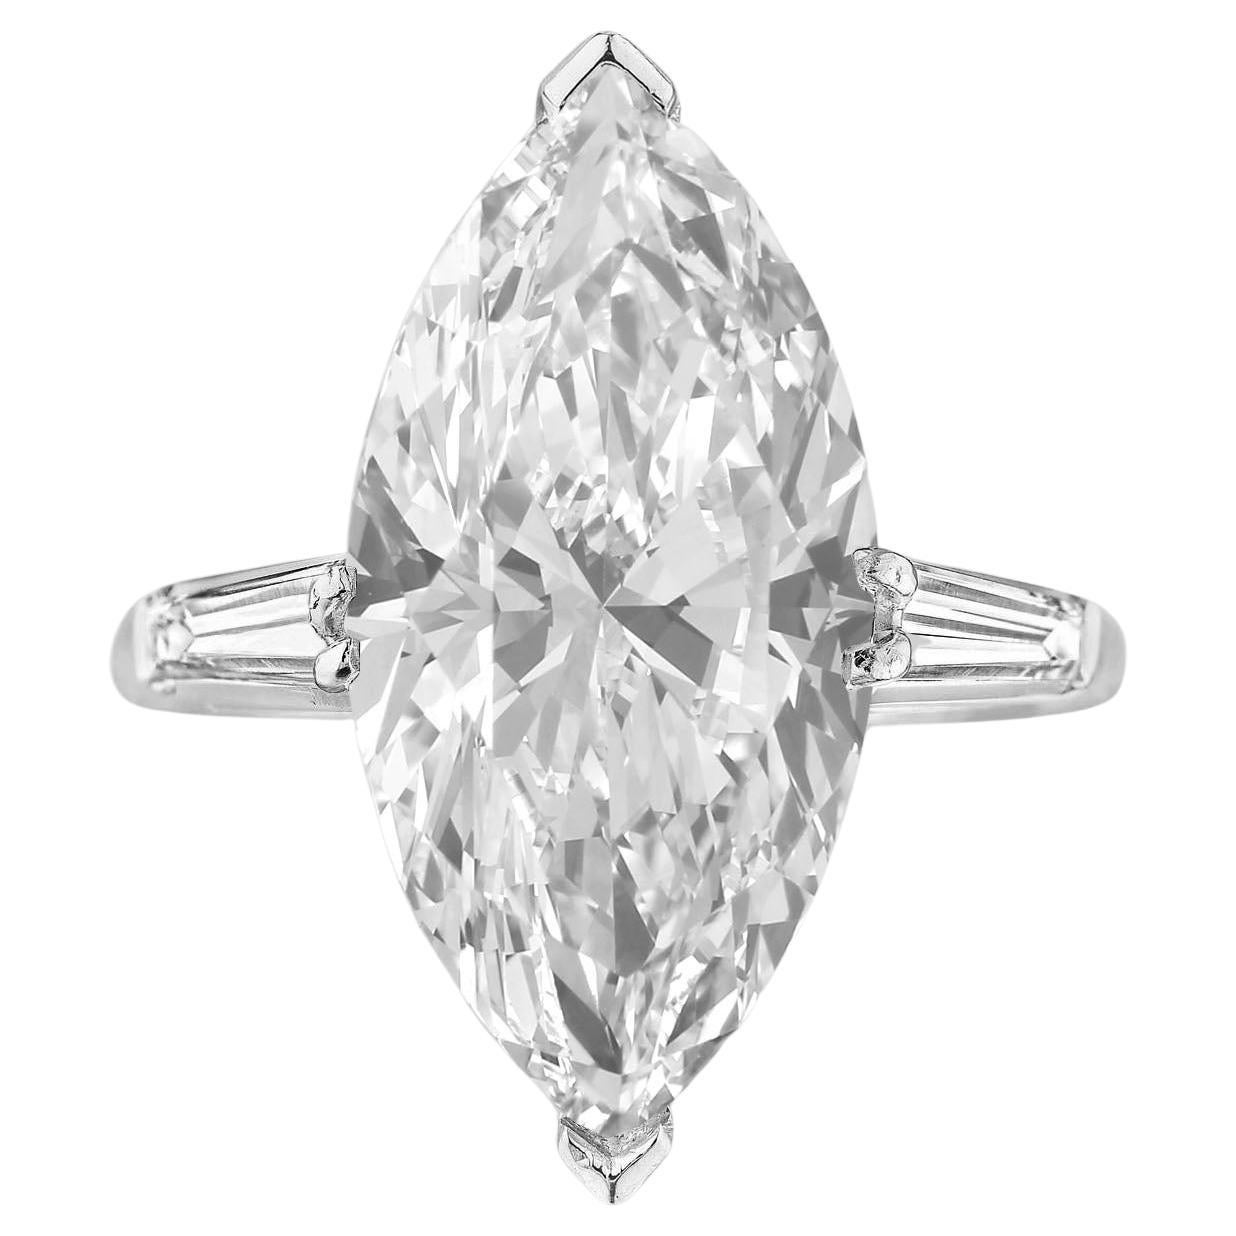 Flawless GIA Certified 3 Carat Marquise Diamond Solitaire Ring